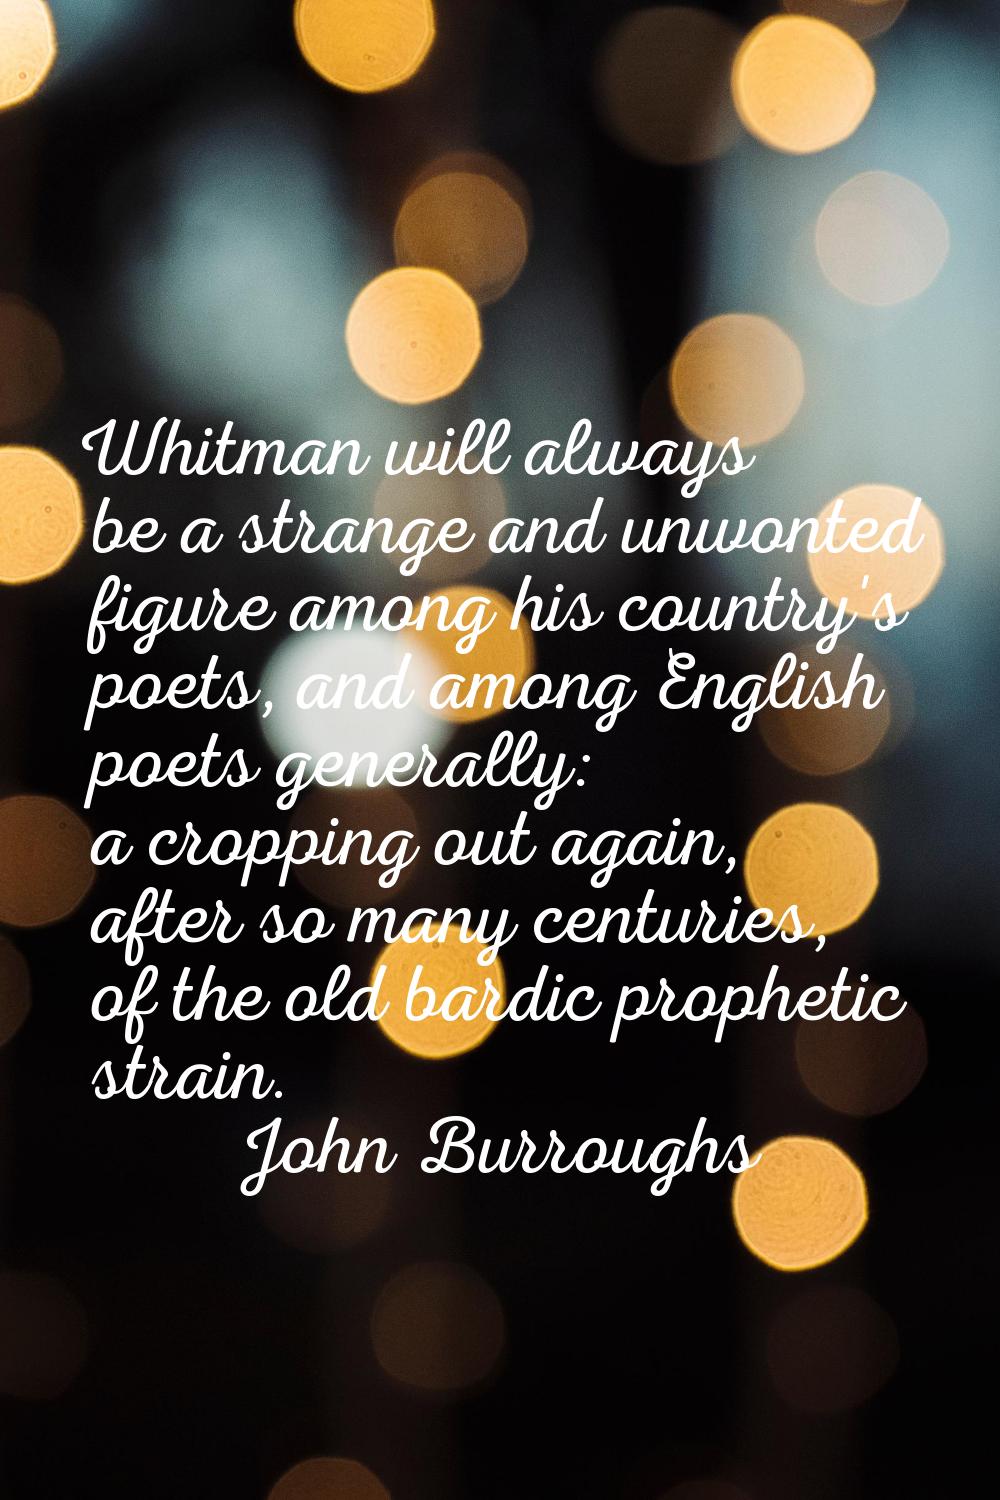 Whitman will always be a strange and unwonted figure among his country's poets, and among English p